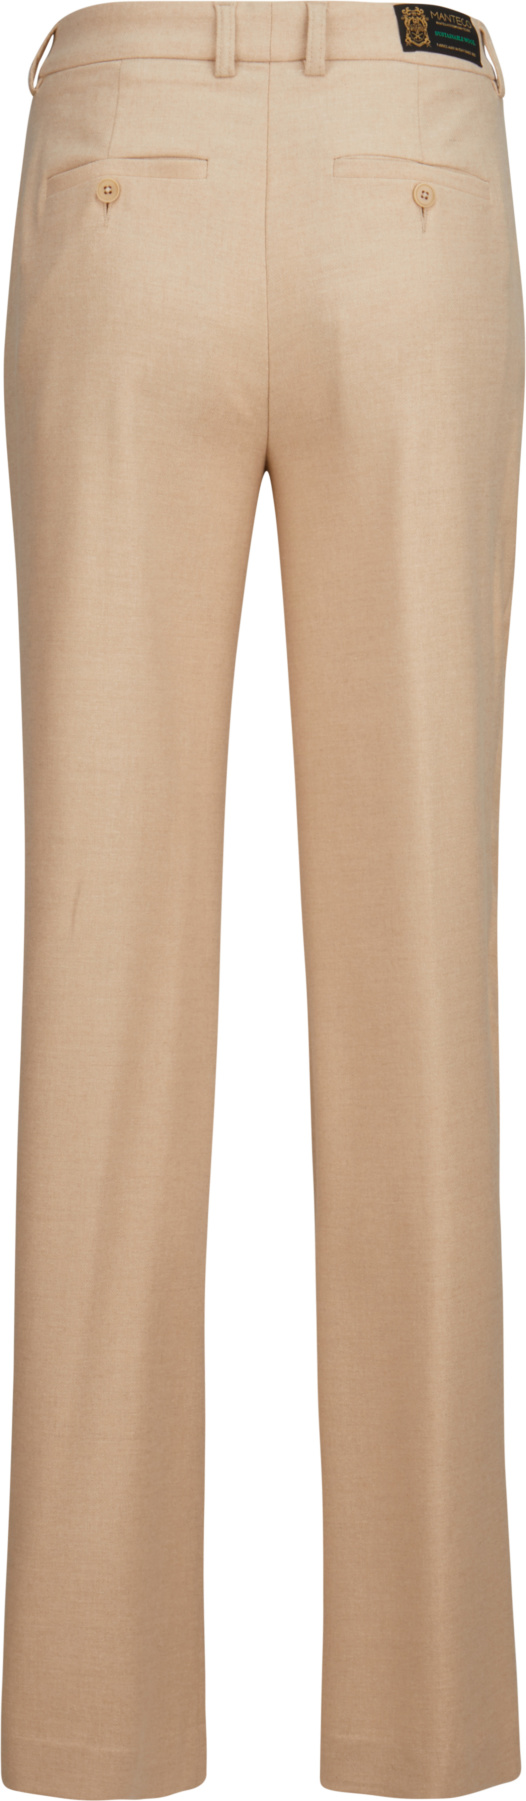 DRYKORN Hose in Creme 438699